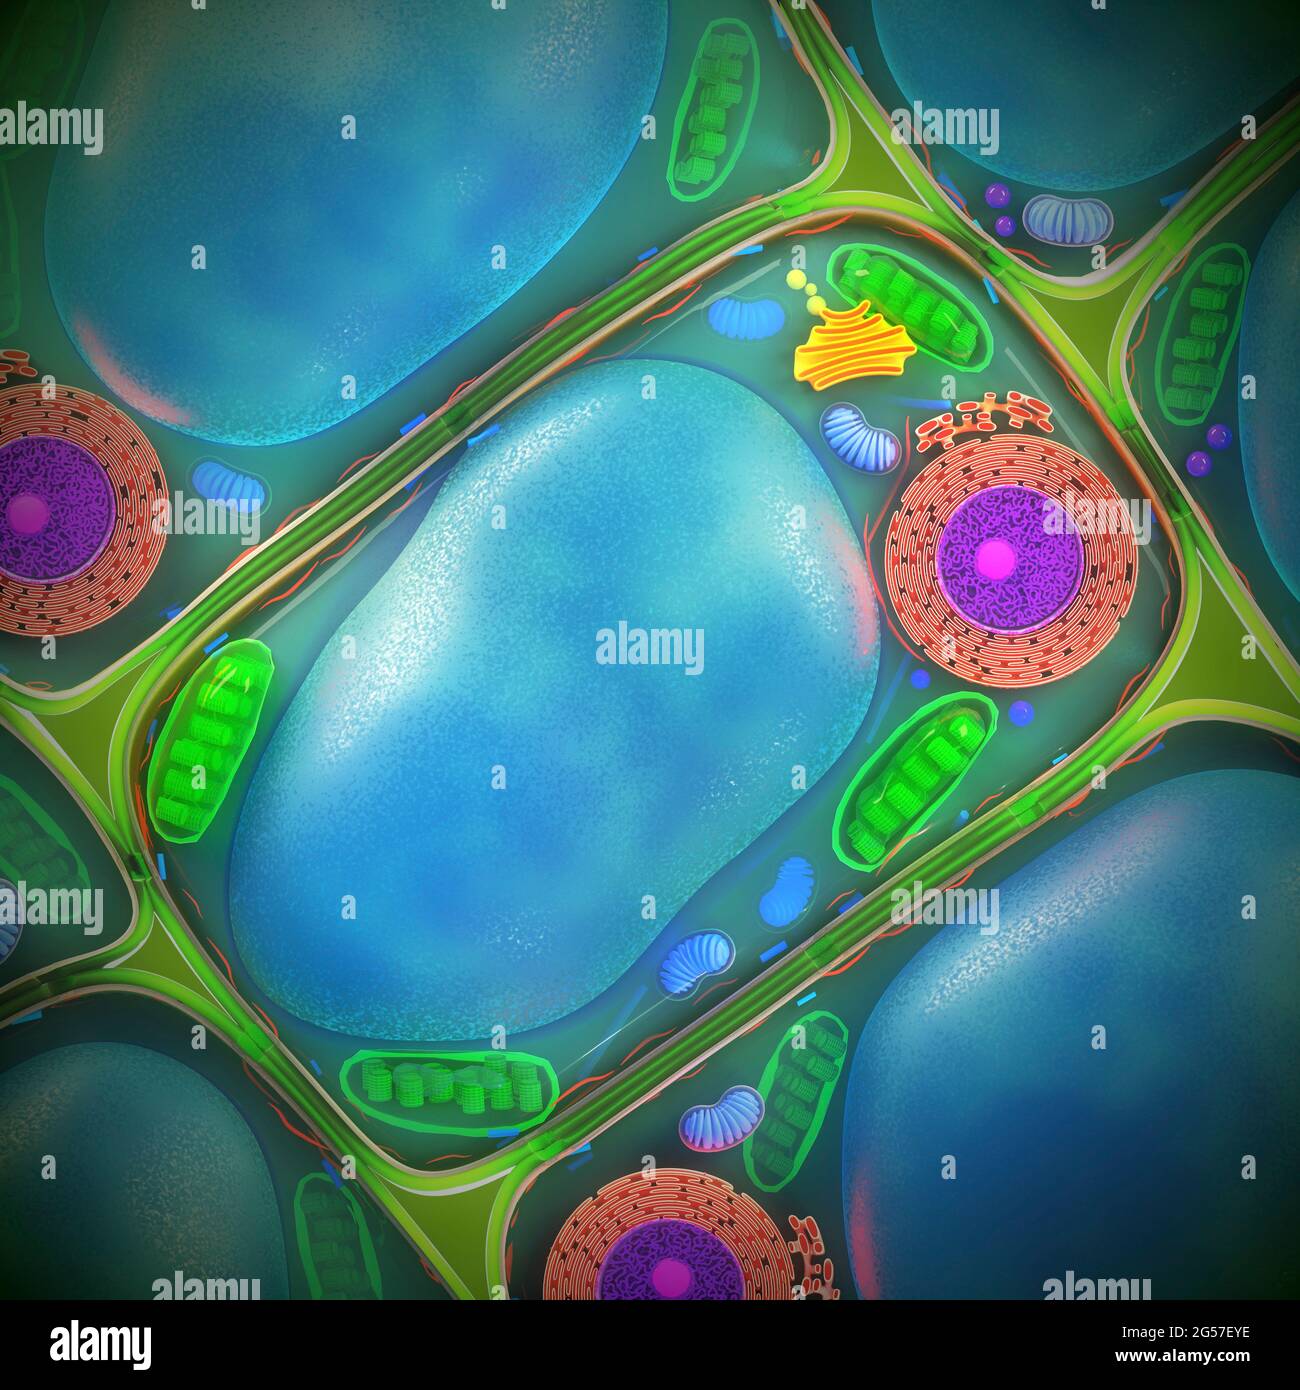 Plant cell structure, illustration Stock Photo